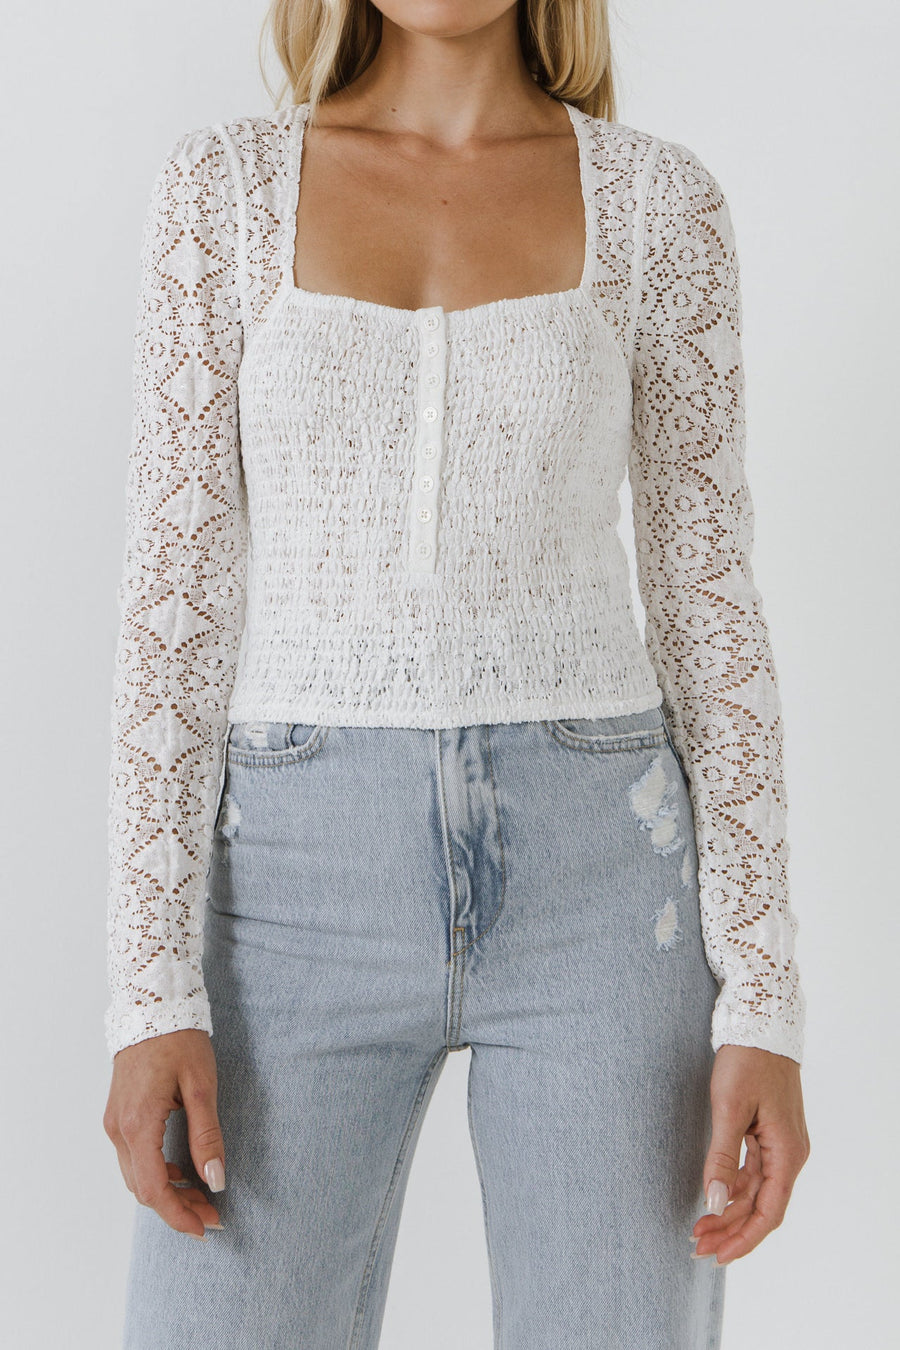 FREE THE ROSES - Lace Long Sleeve Top - TOPS available at Objectrare